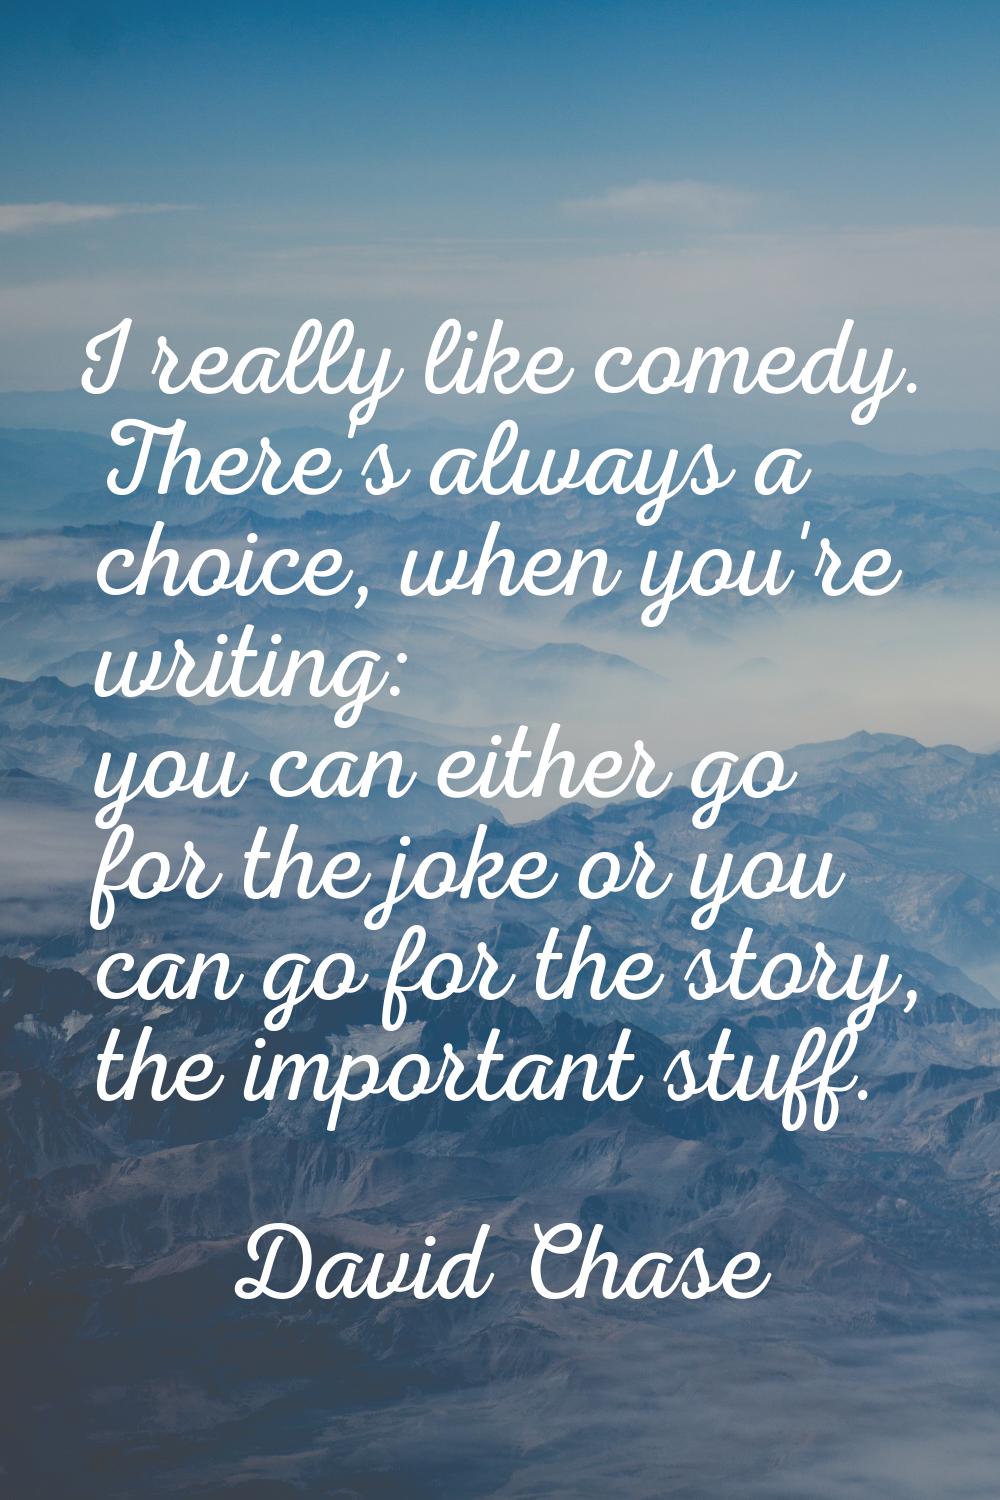 I really like comedy. There's always a choice, when you're writing: you can either go for the joke 